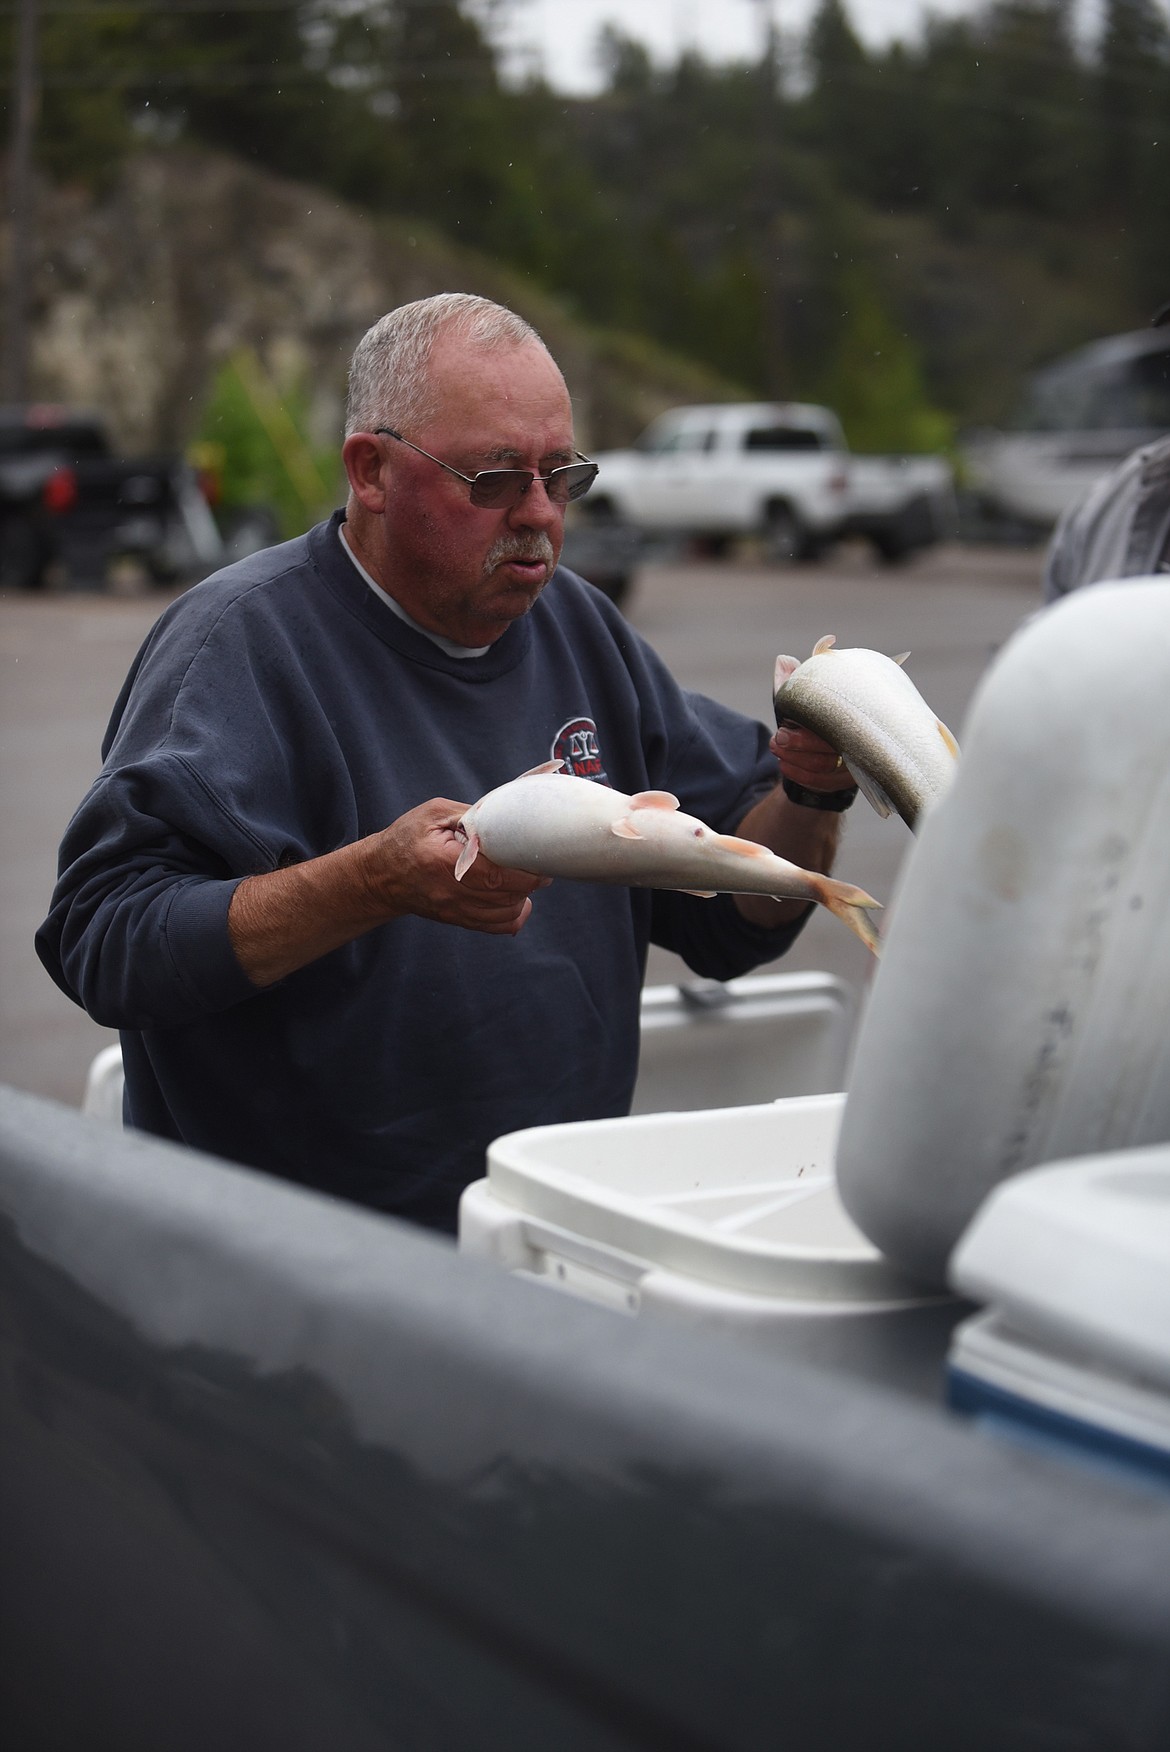 Columbia Falls fisherman Dan Smith places lake trout in a cooler at the Somers boat launch Saturday. The launch is one of the places where Mack Days anglers can turn fish in to members of the Salish and Kootenai Tribal Council. Smith caught 18 lakers. (Scott Shindledecker/Daily Inter Lake)